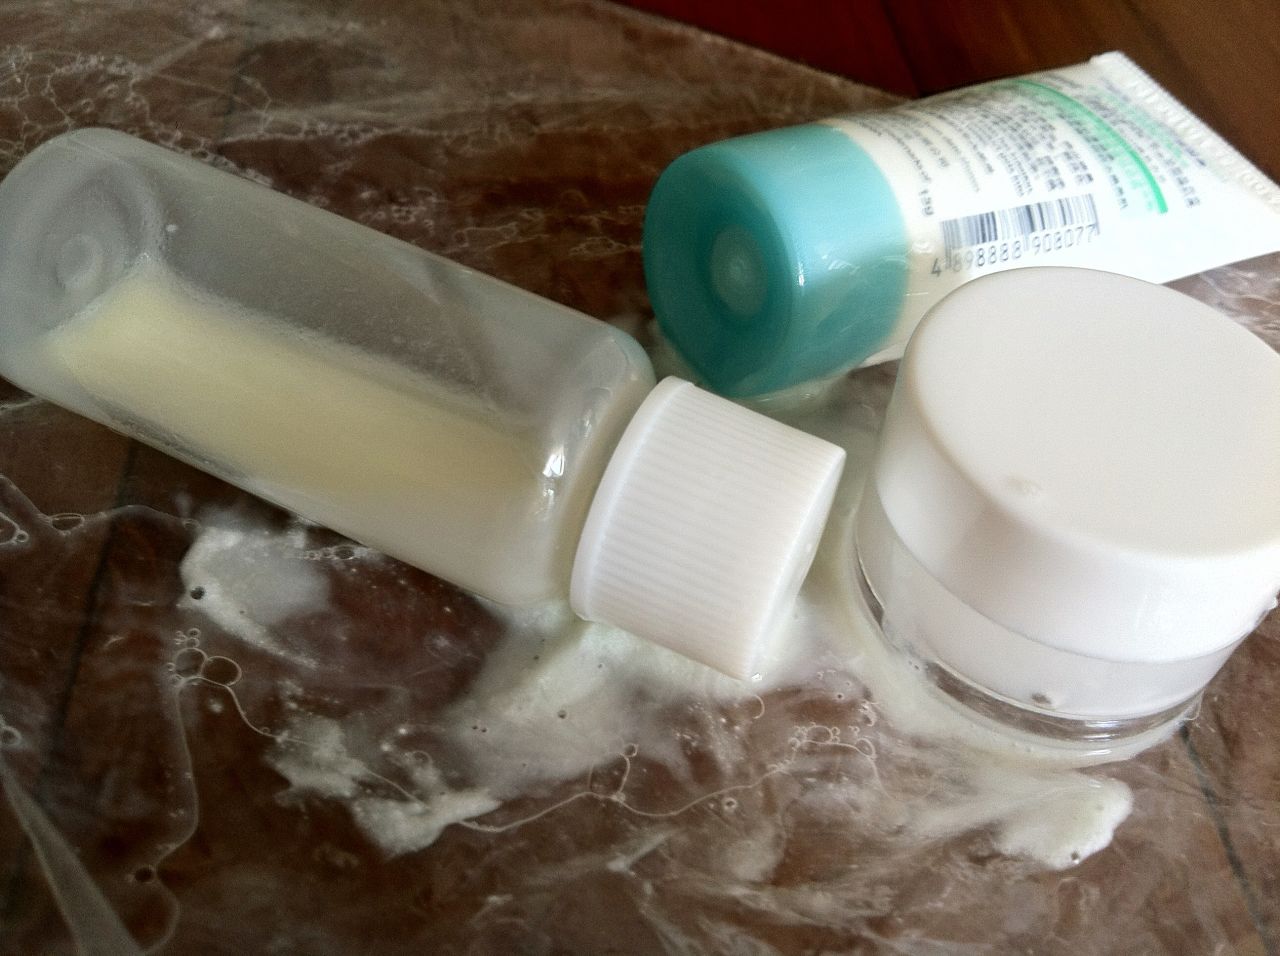 Trial-size shampoo bottles are handy -- until they burst open in-flight, spreading glycerol soap snot all over your bag. 